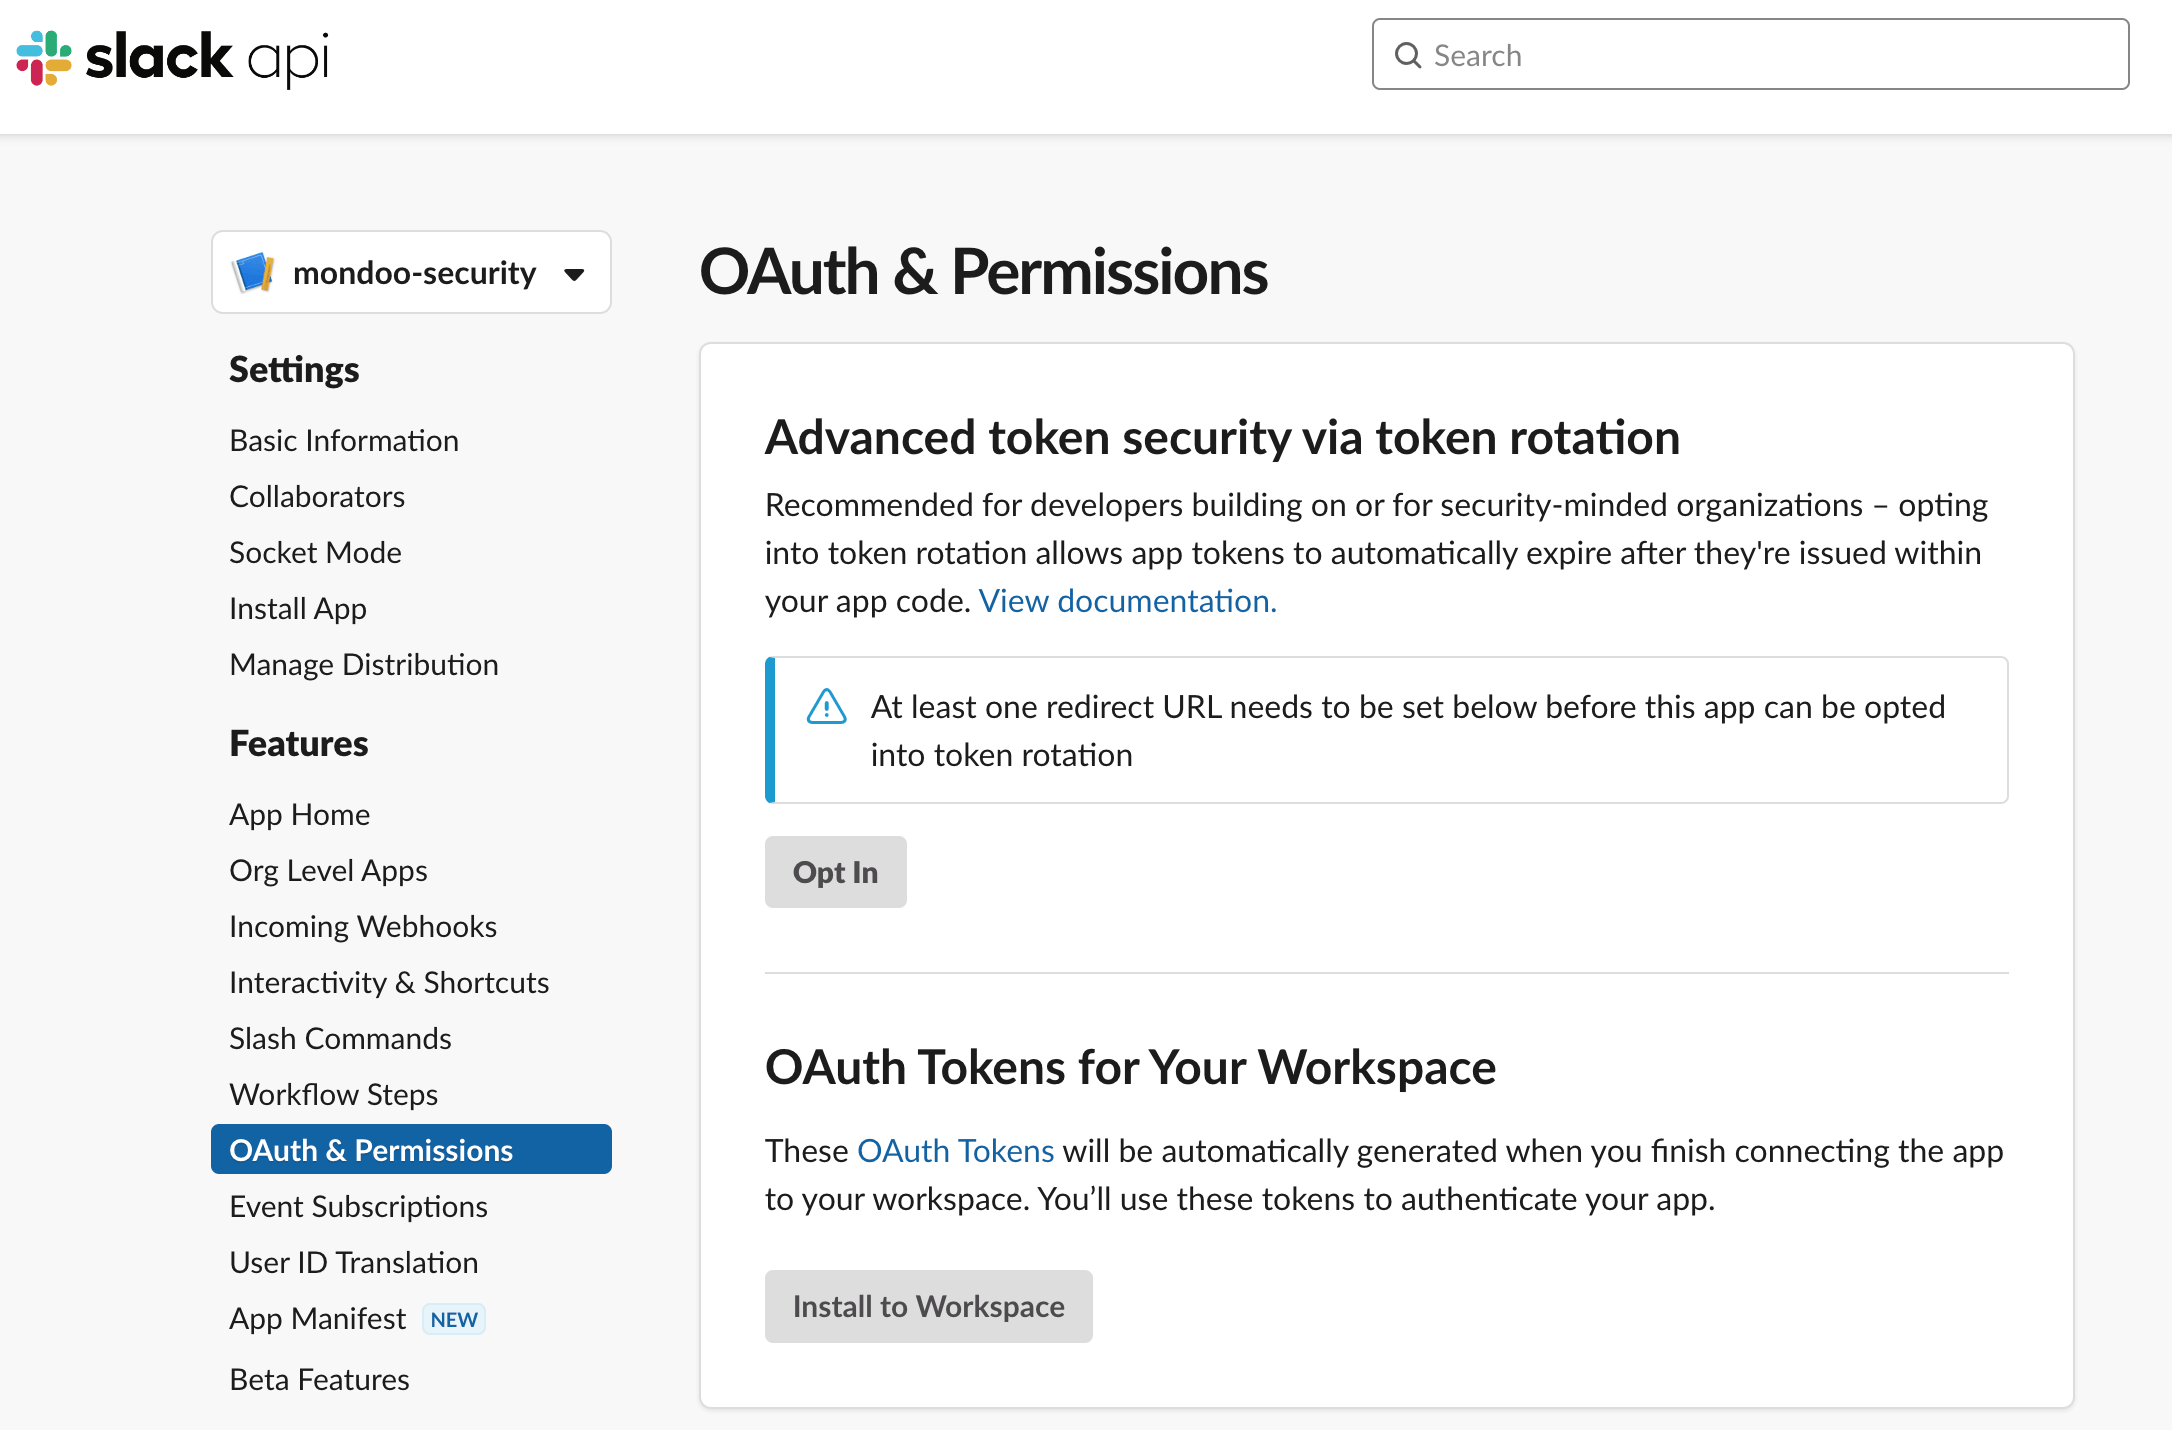 Slack app settings - OAuth and permissions page